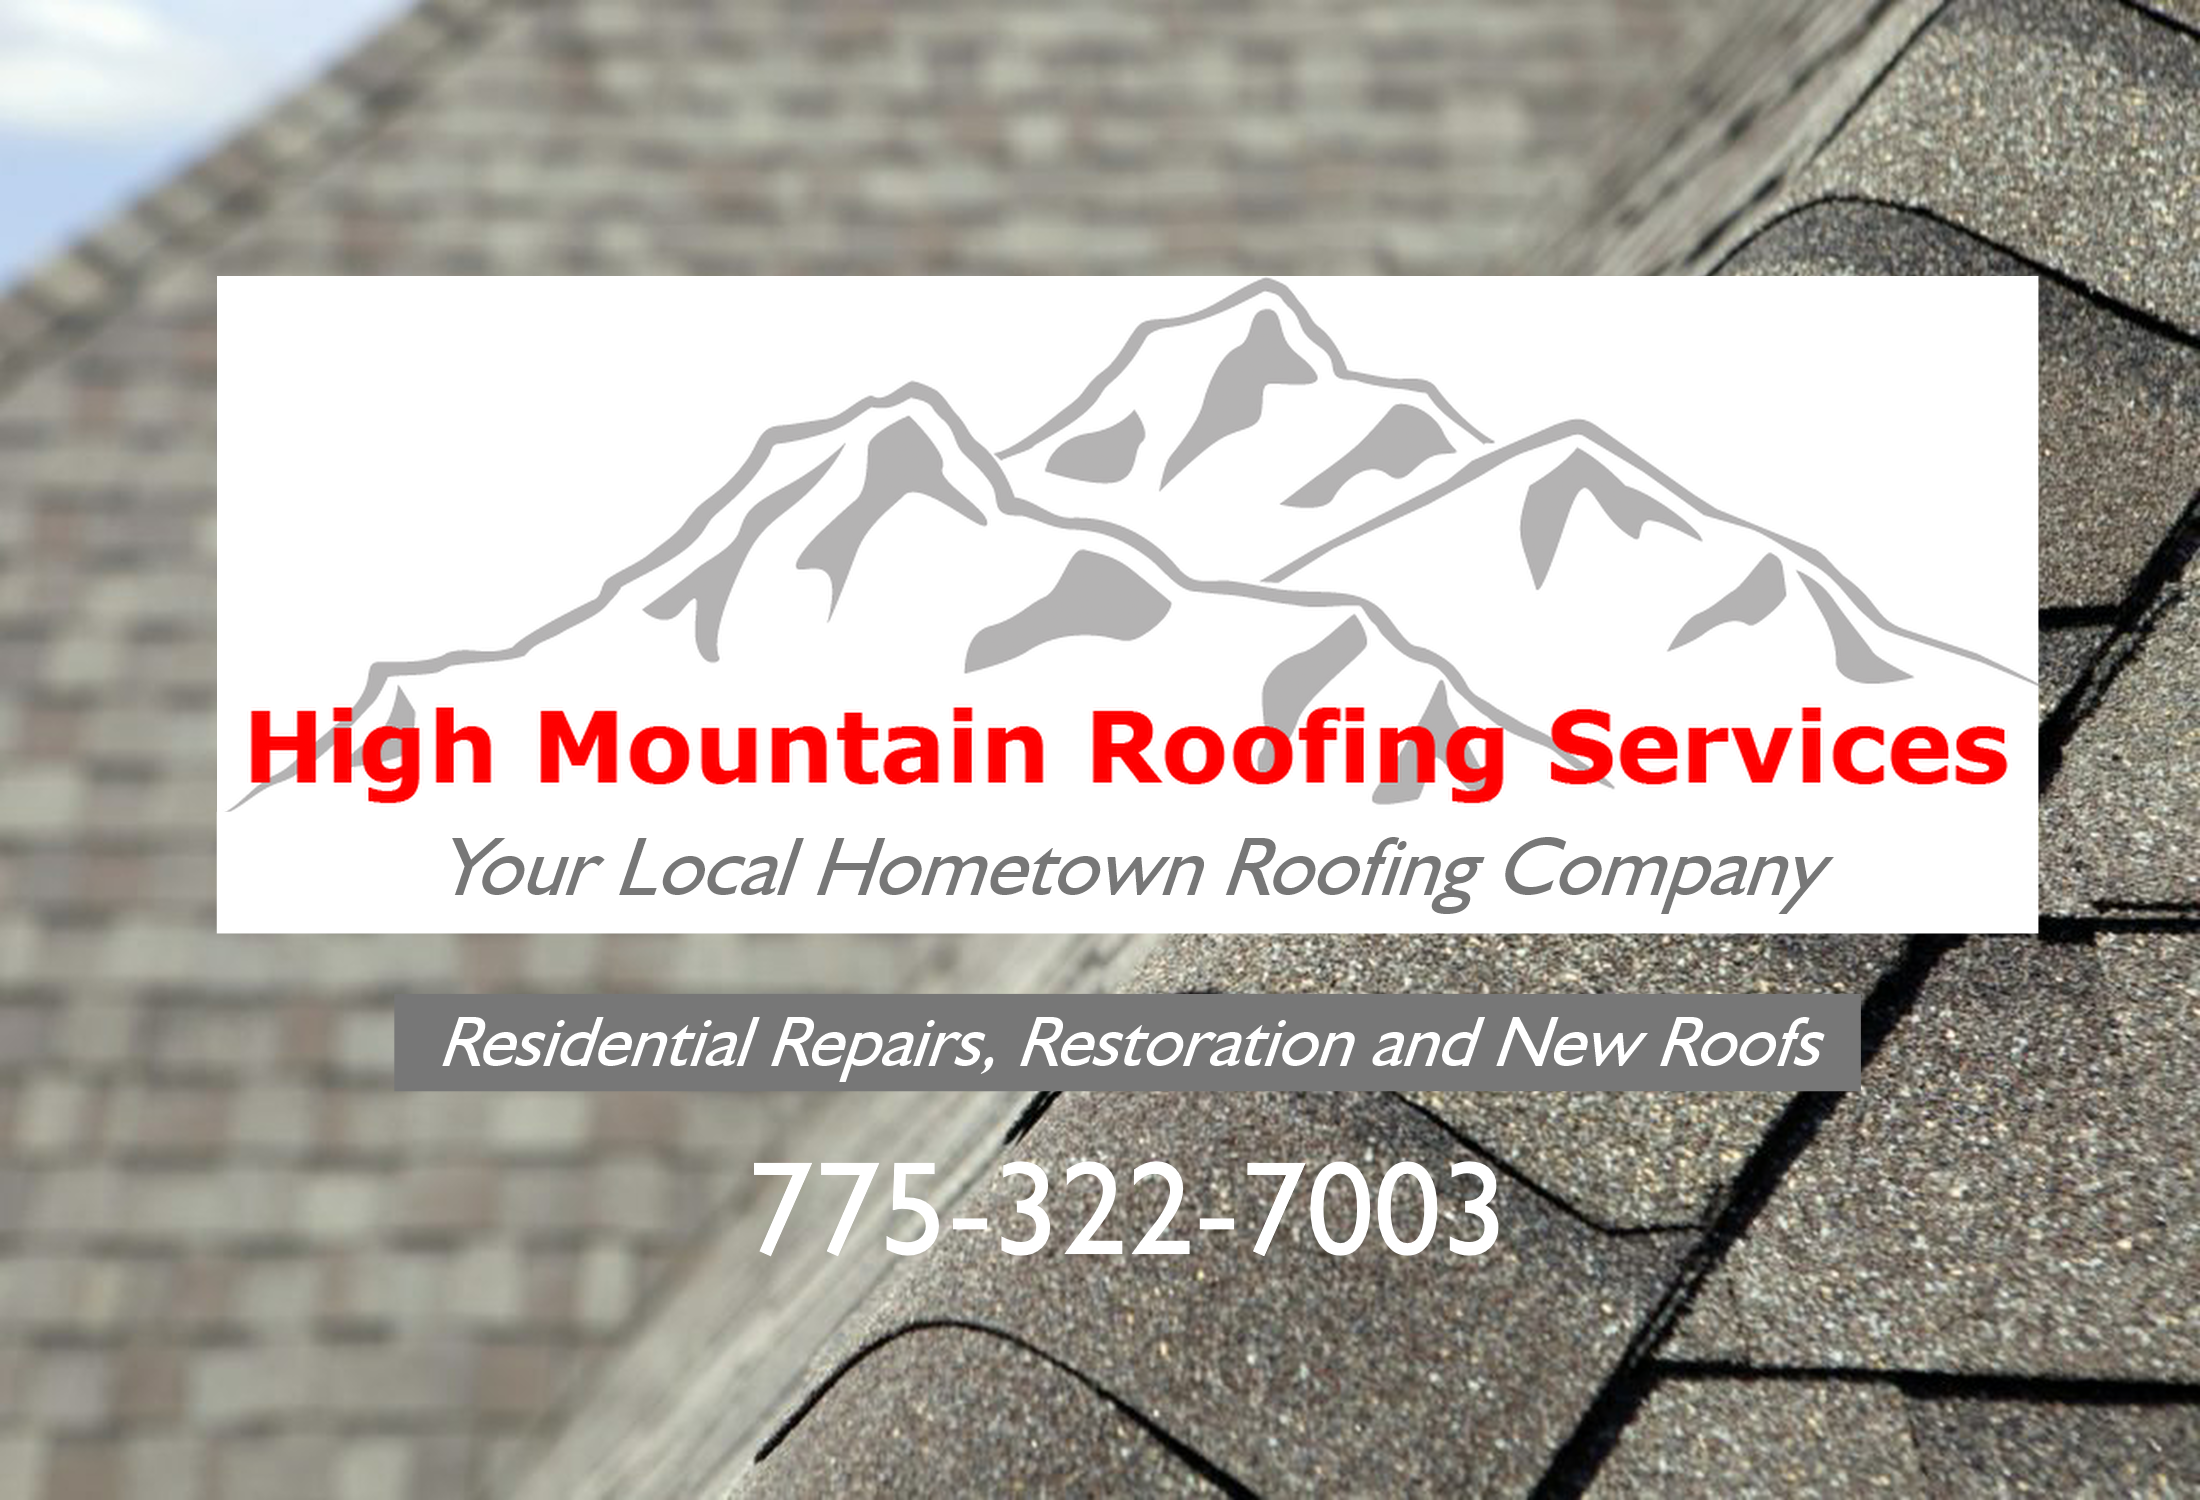 roofing tiles with company logo overlayed